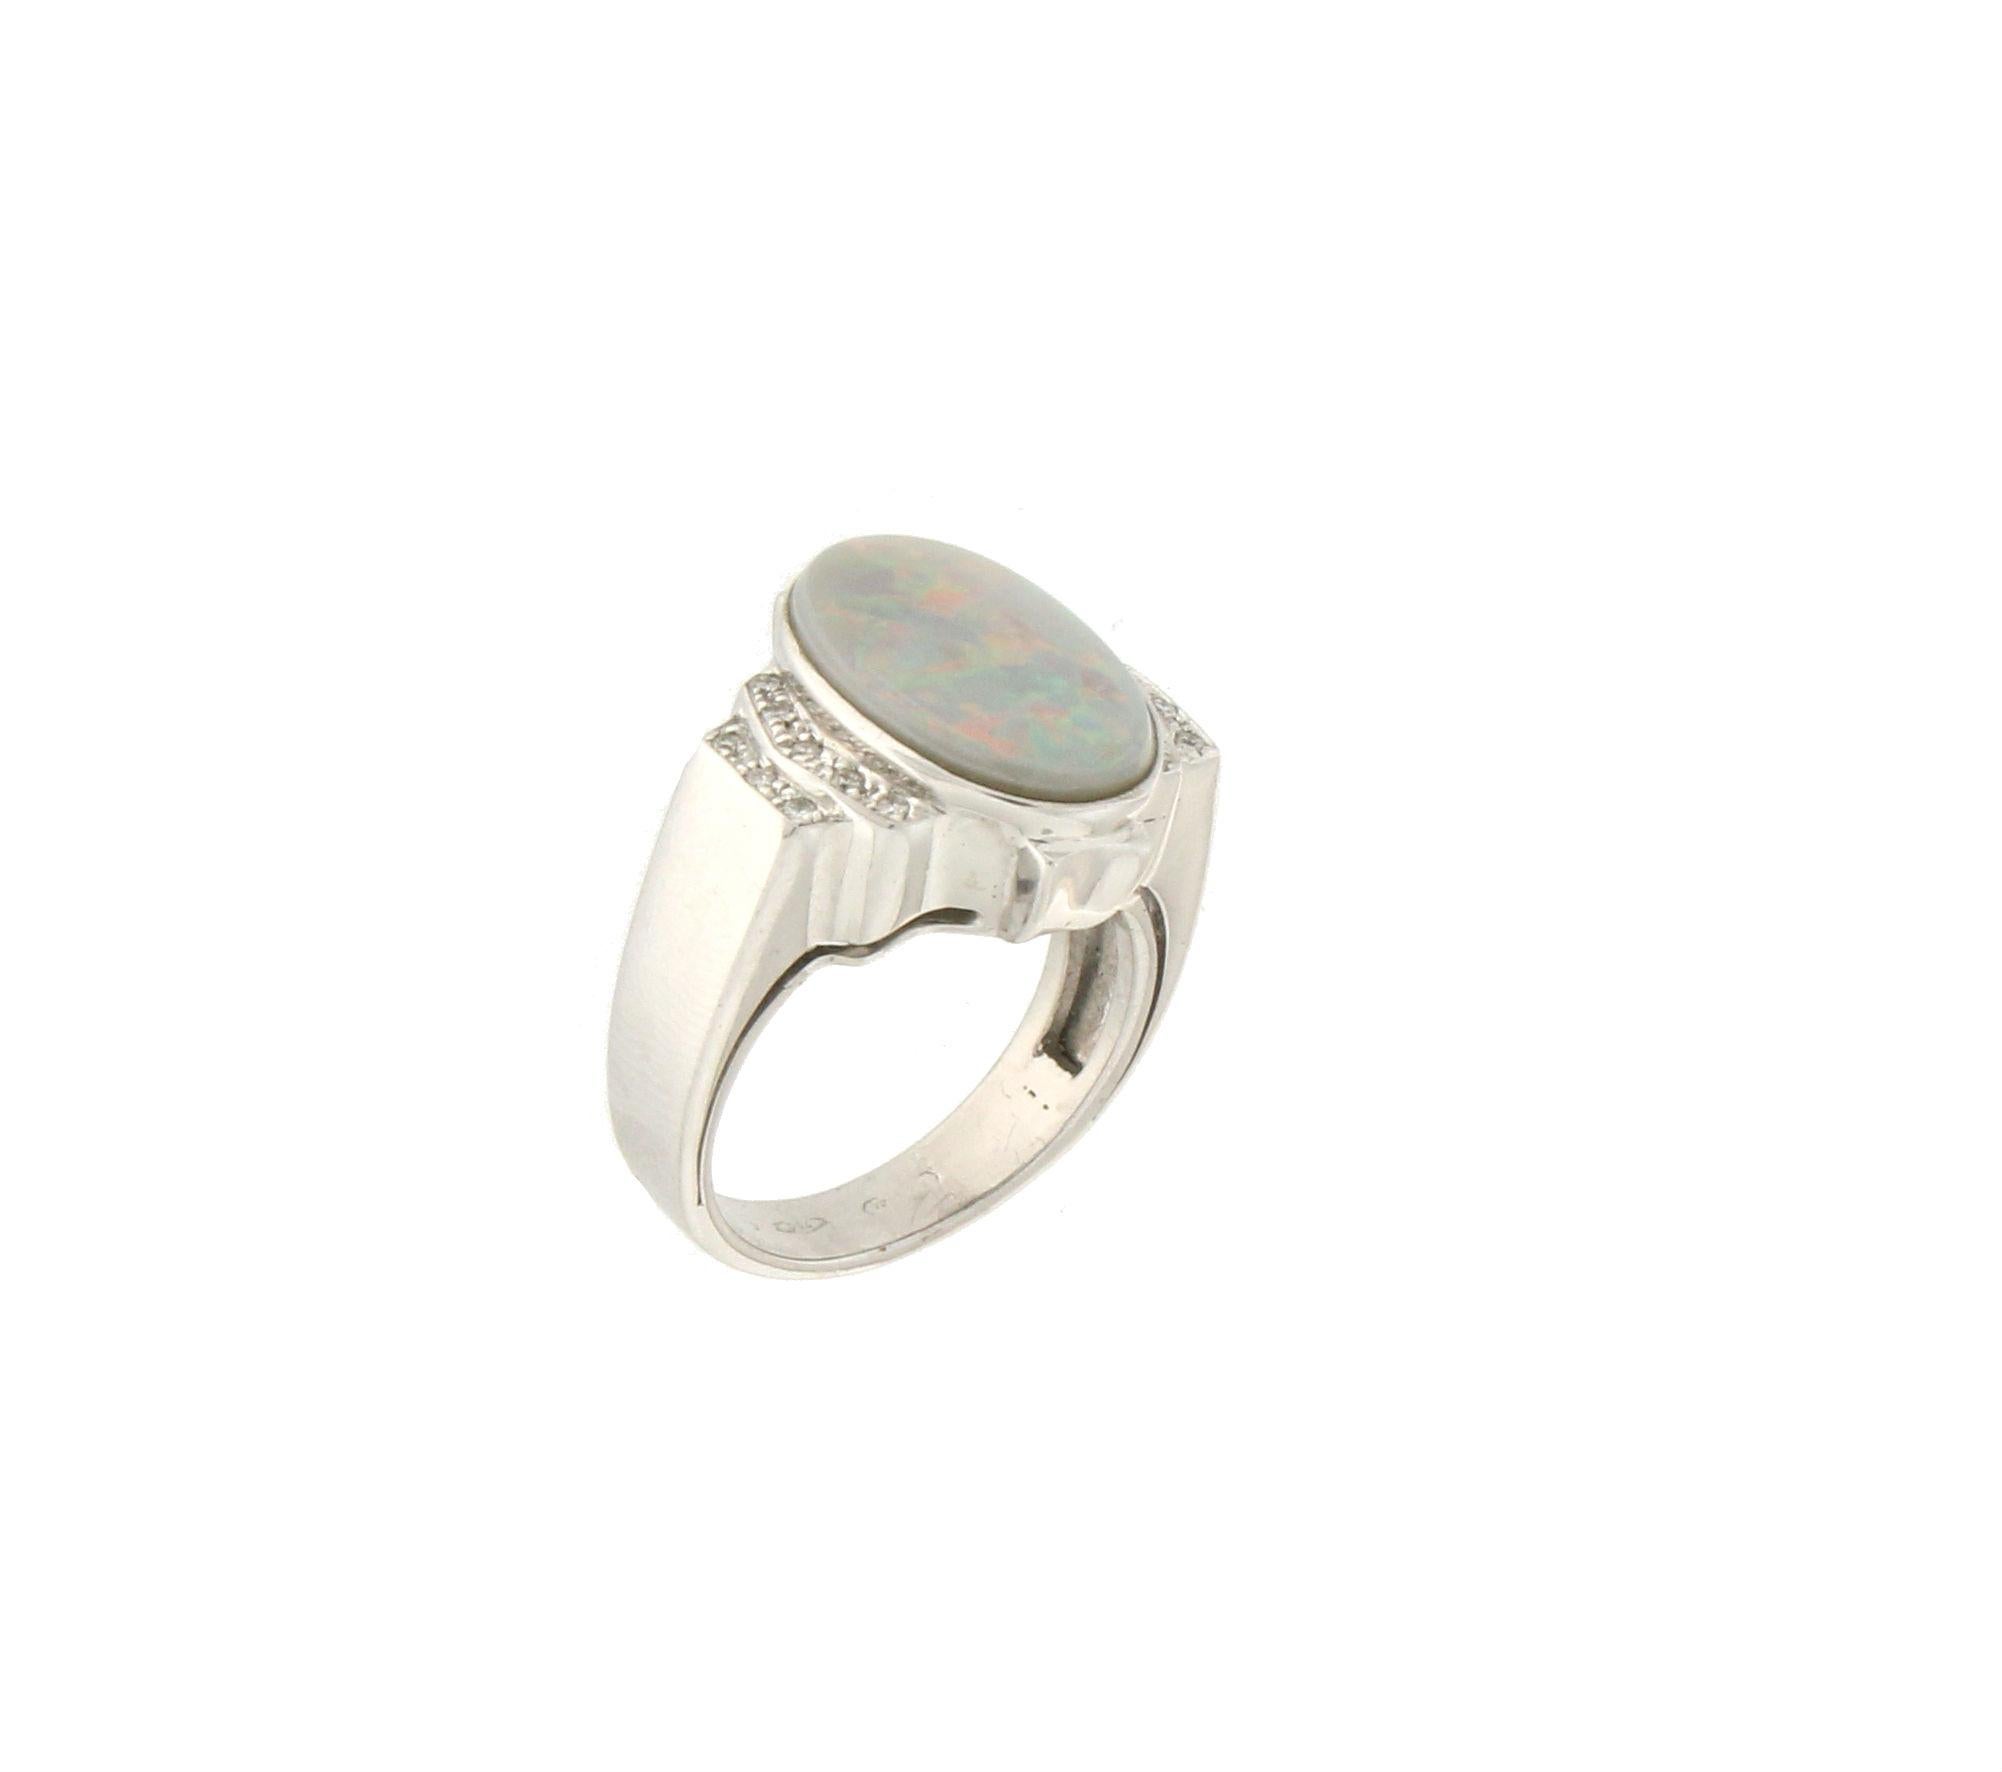 18 karat white gold cocktail ring. Handmade by our artisans assembled with diamonds and Australian opal

Diamonds weight 0.16 karat
Opal weight 3.80 karat
Ring total weight 11.30 grams
Ring size 6.85 US 13.50 Ita
(all rings are can be resized)